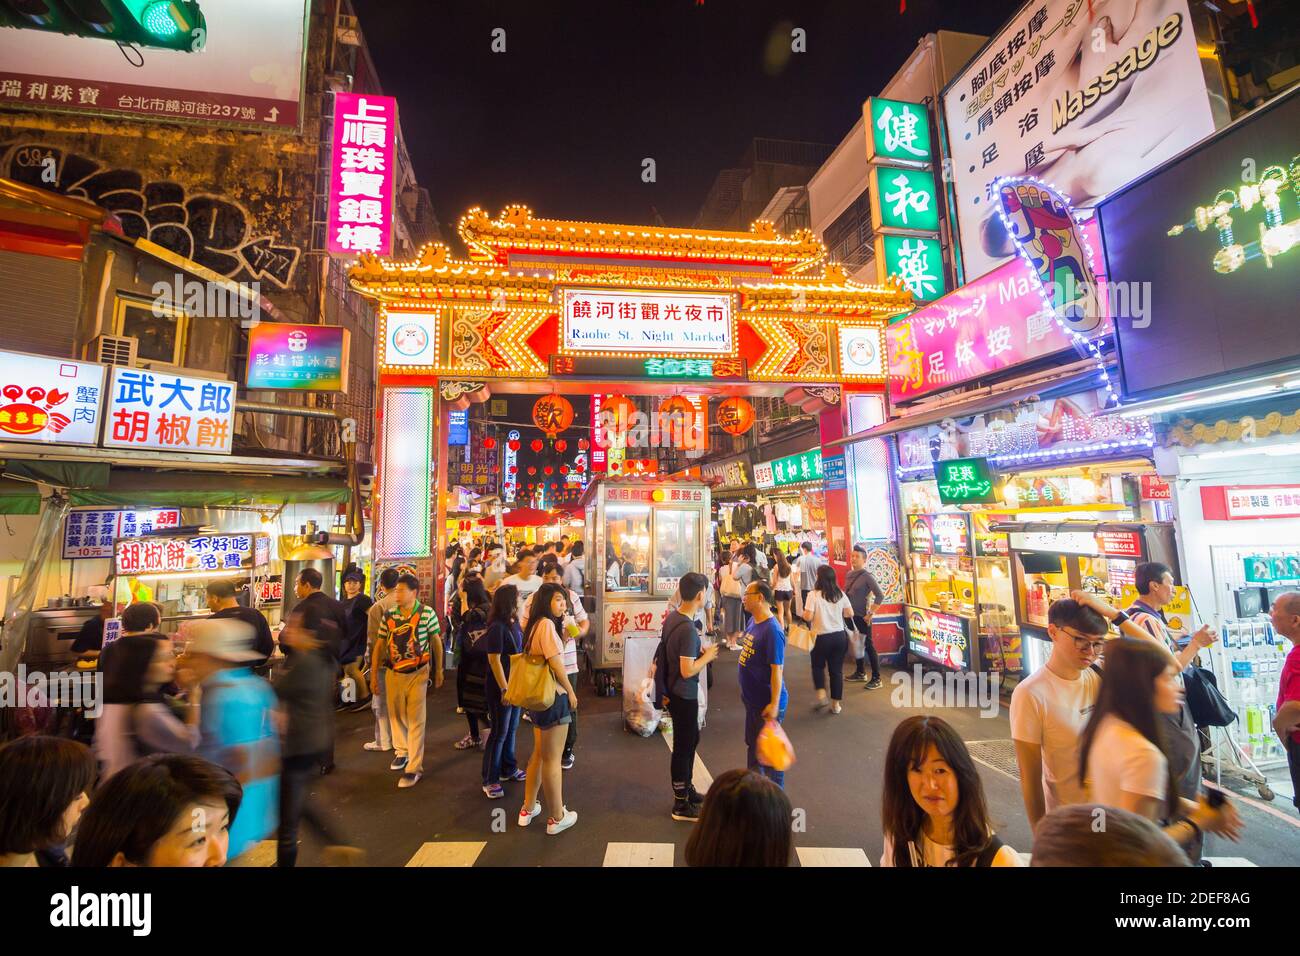 Eating out at a night market in Taipei, Taiwan Stock Photo